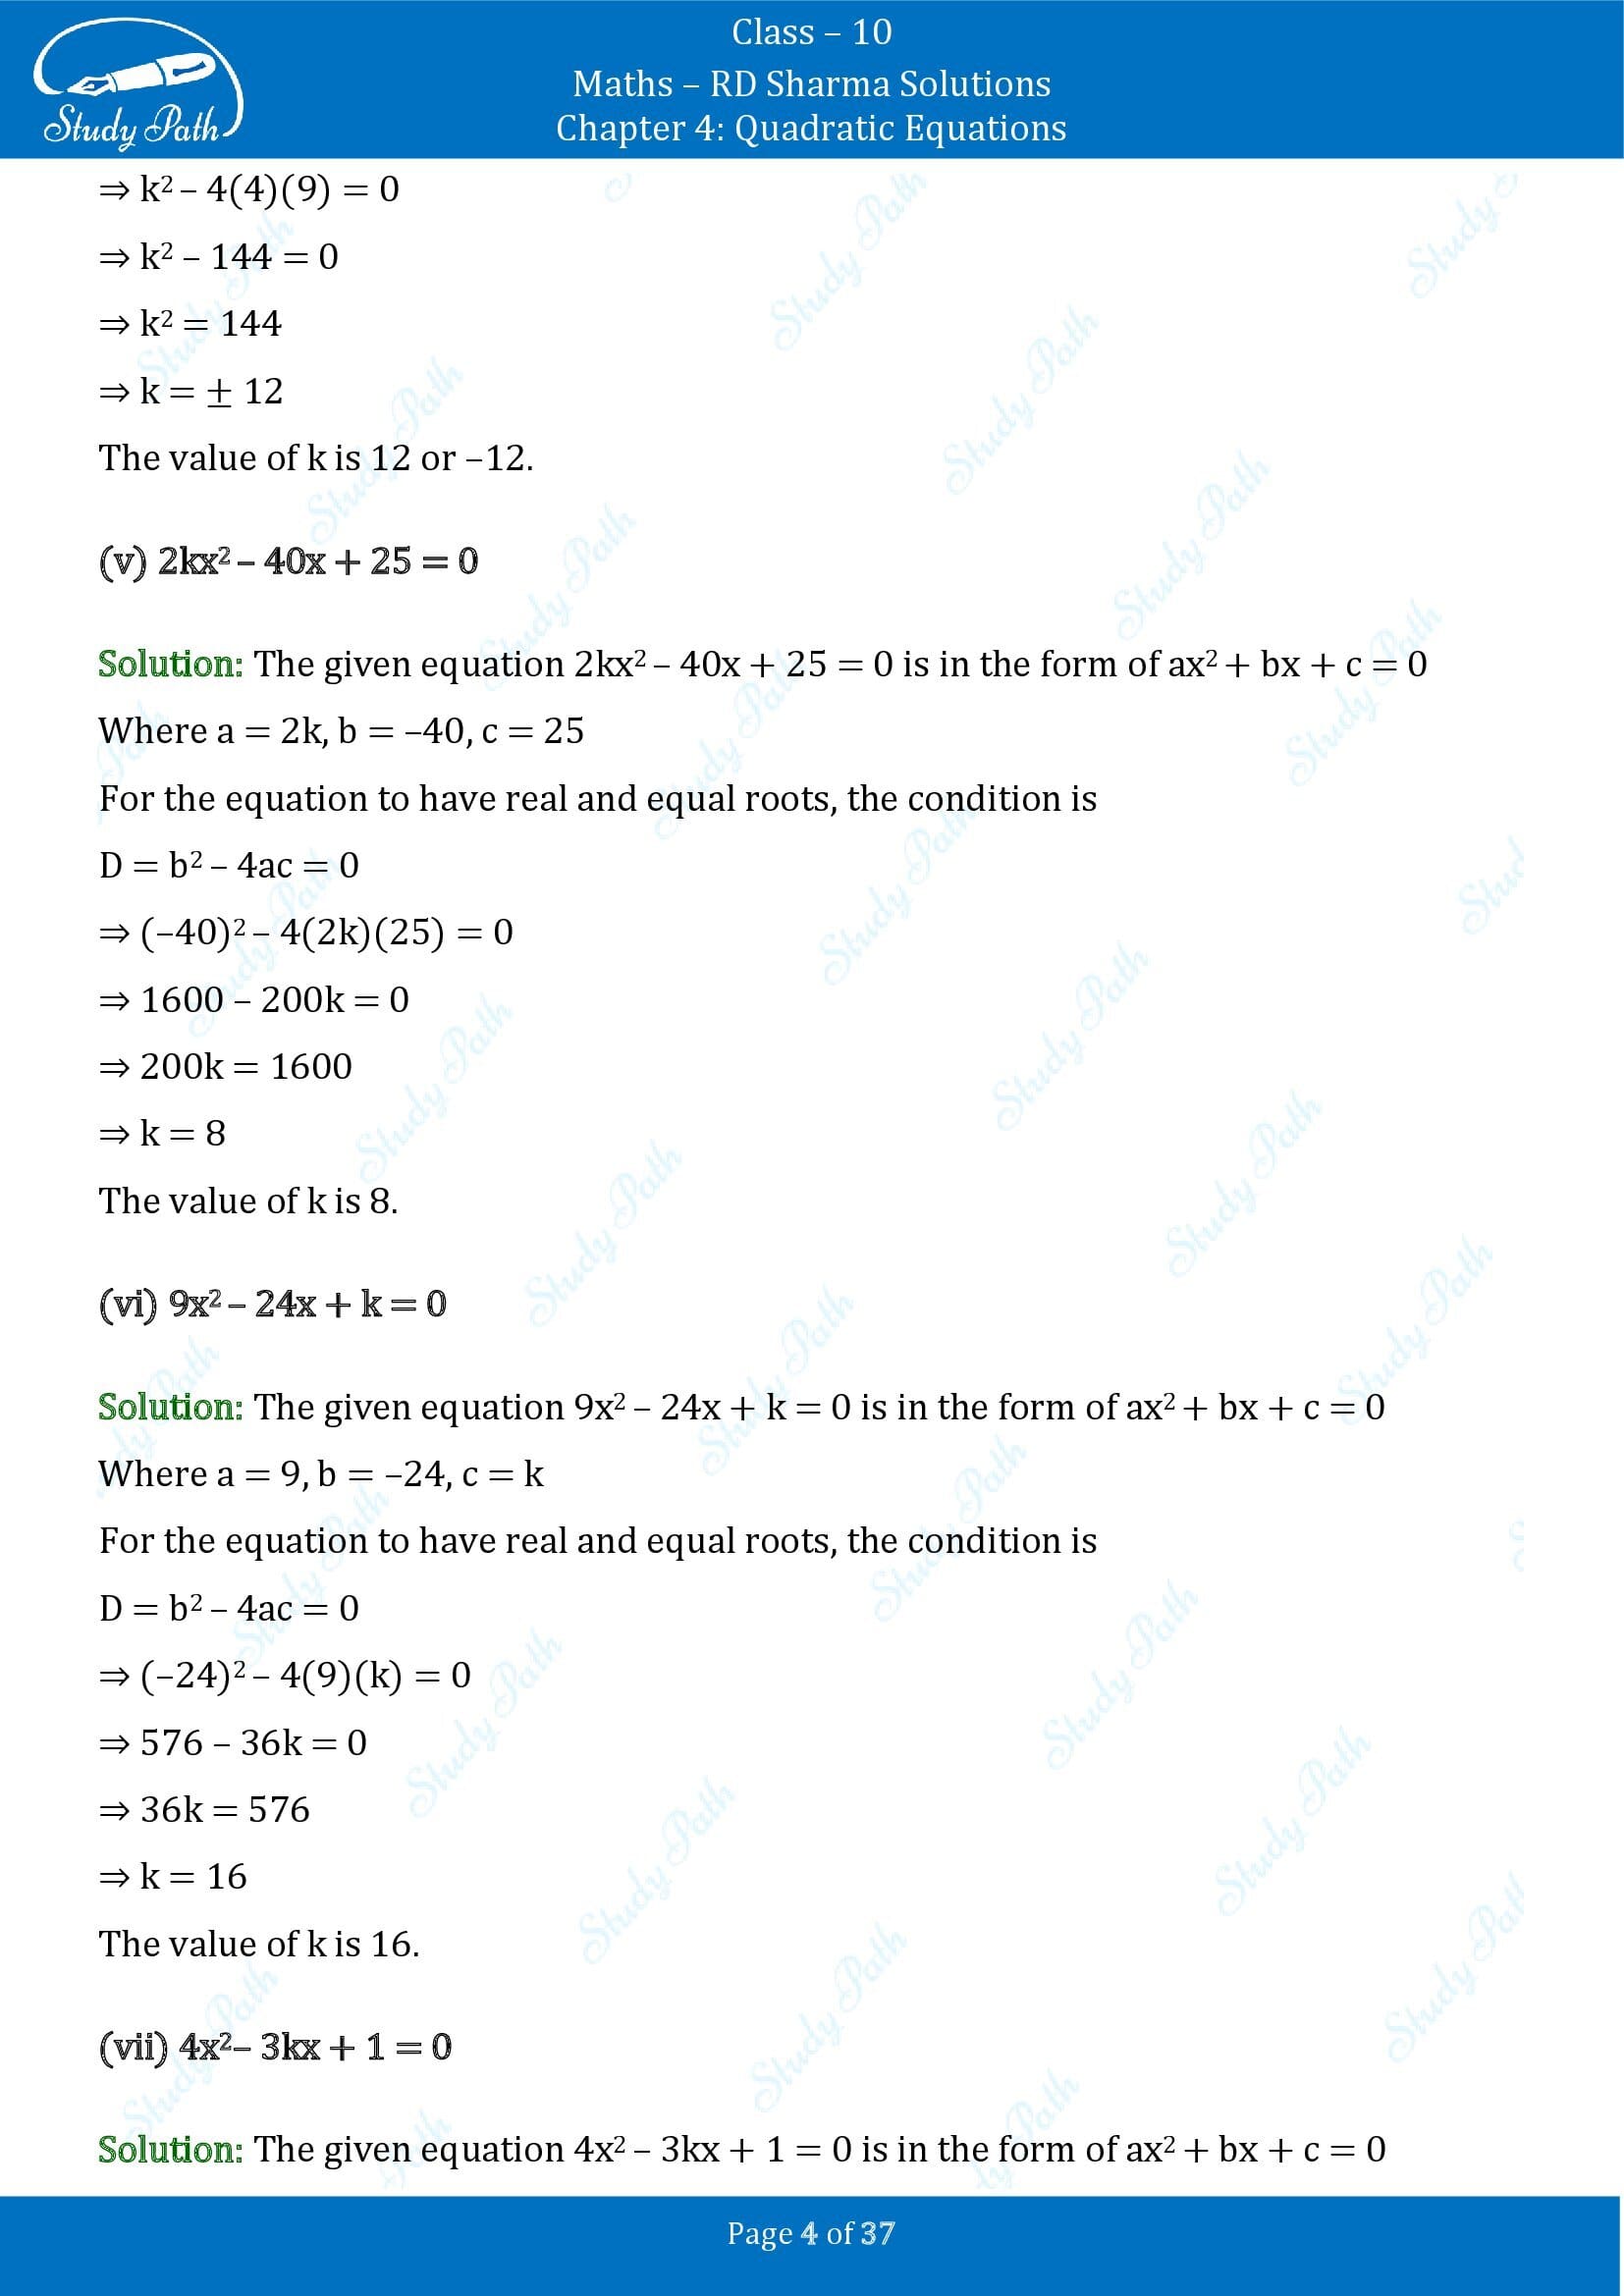 RD Sharma Solutions Class 10 Chapter 4 Quadratic Equations Exercise 4.6 00004